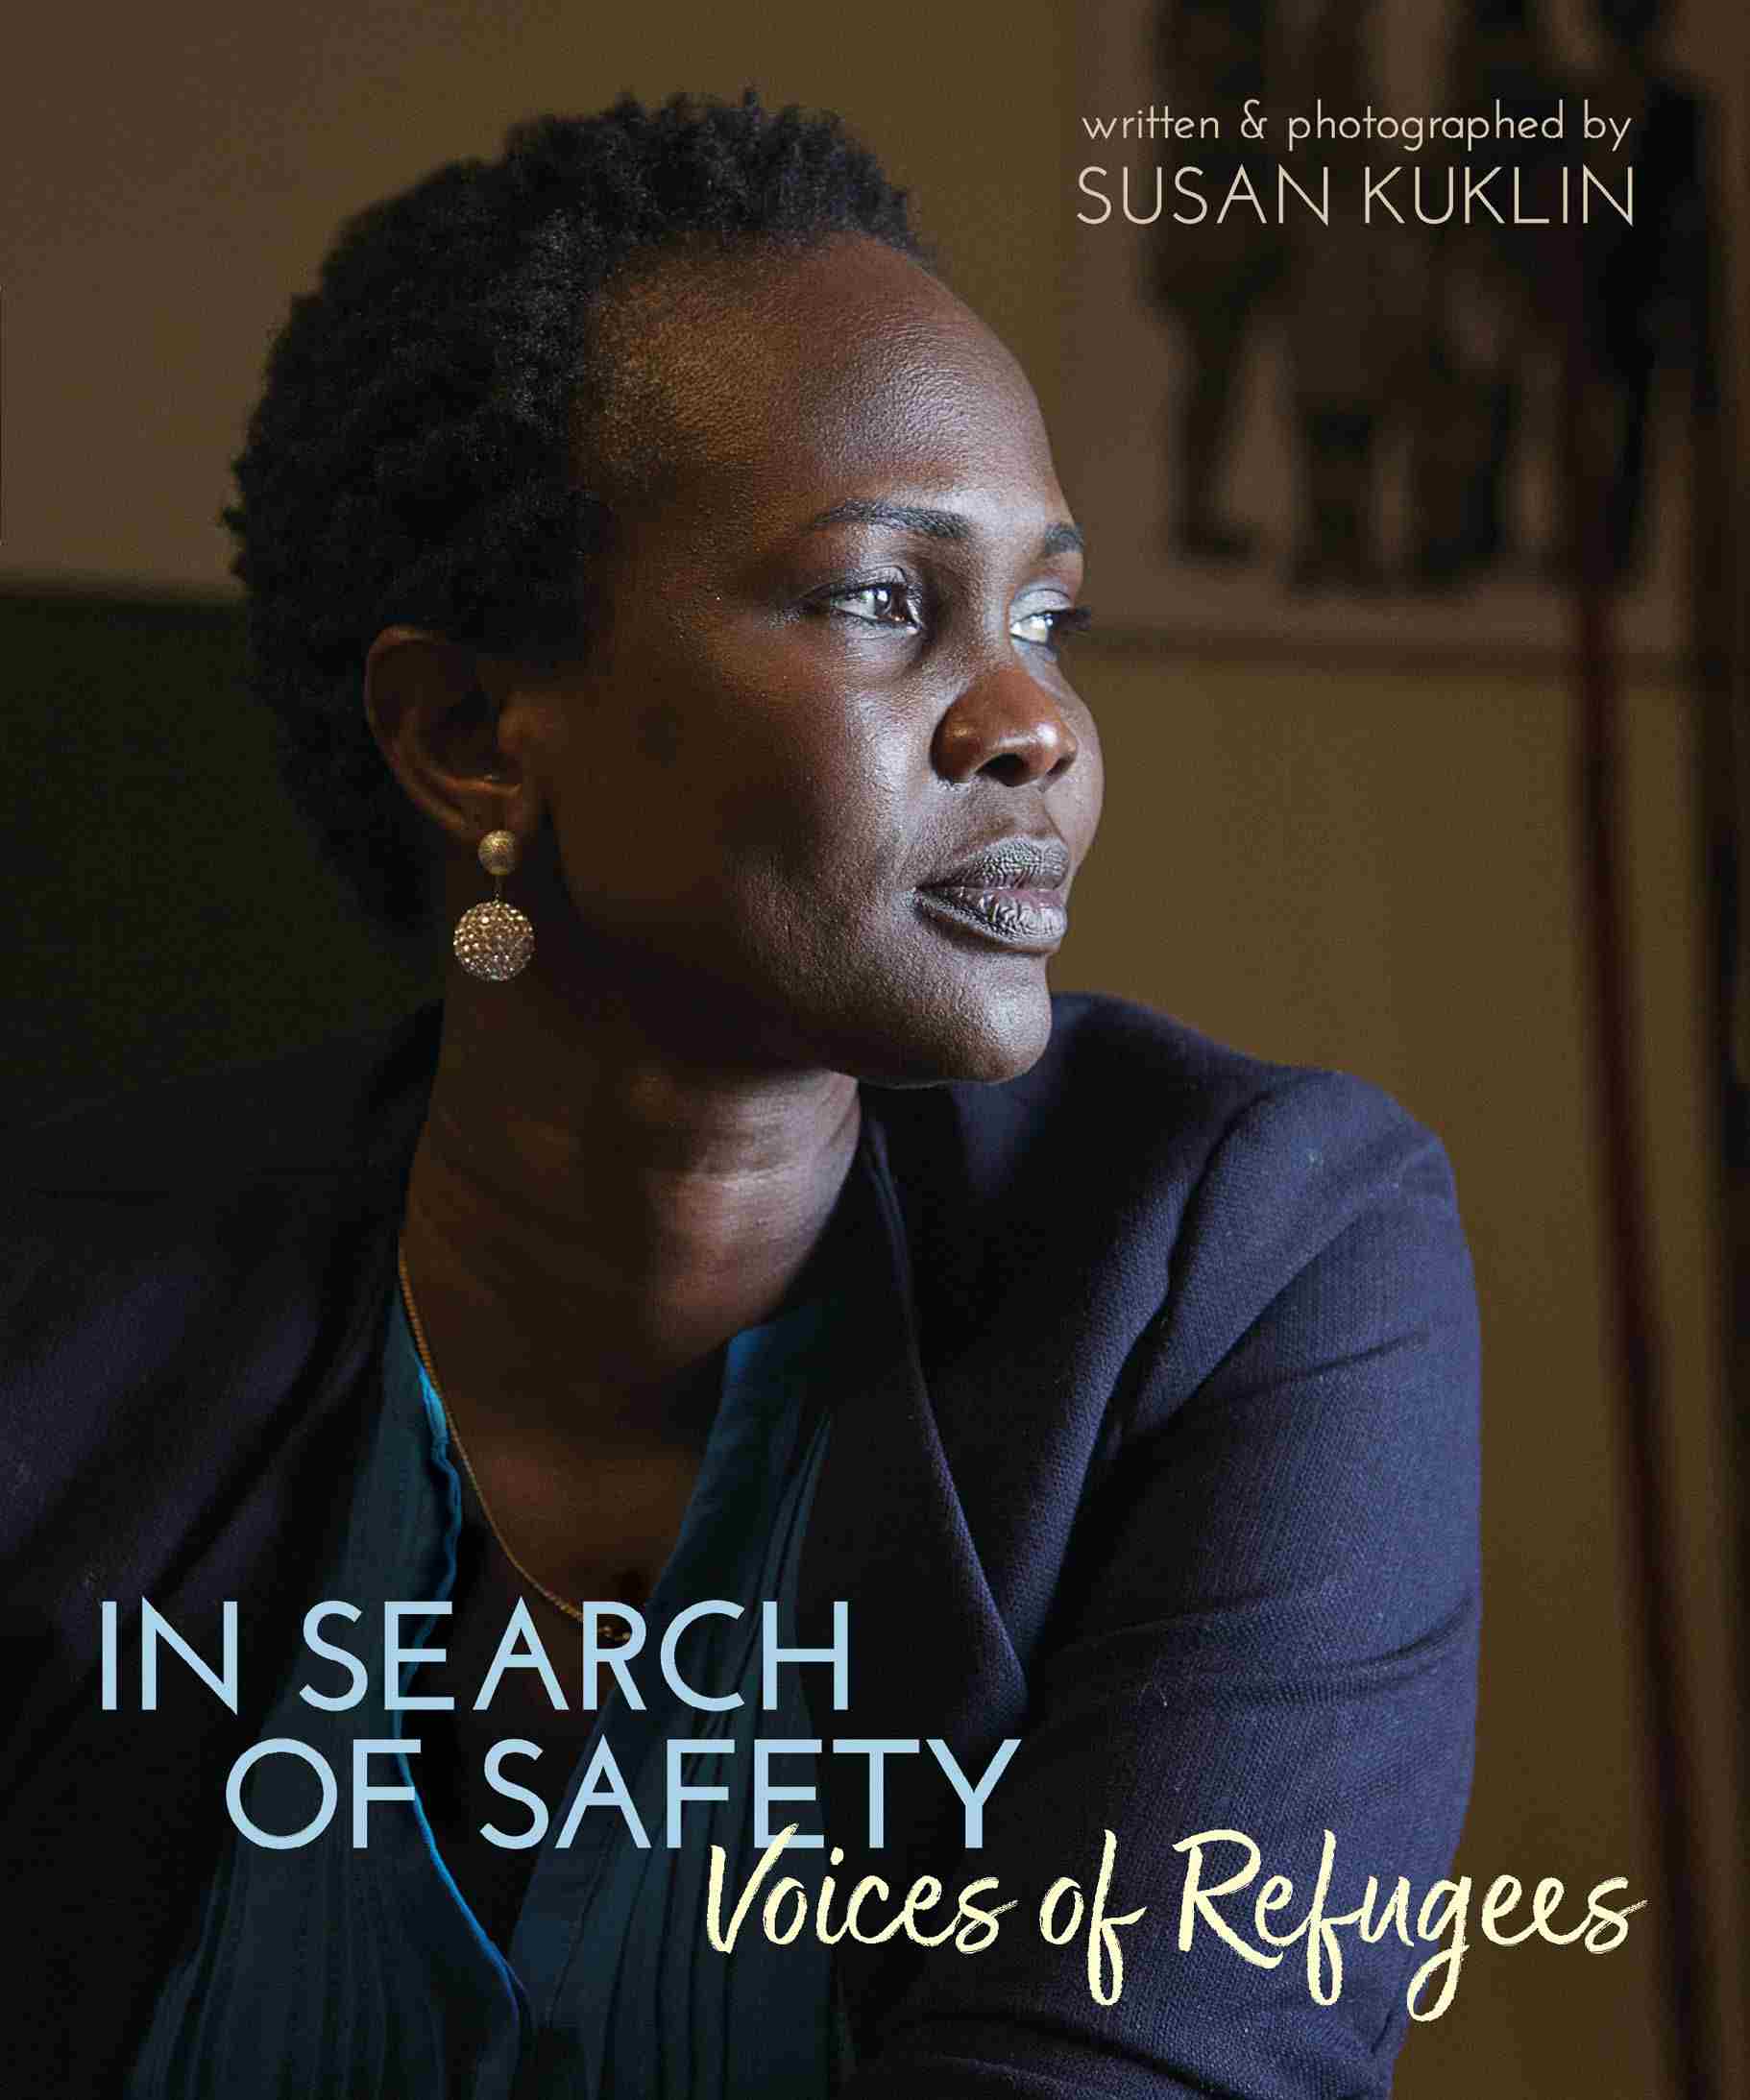 In Search of Safety voices of refugees - photo 1